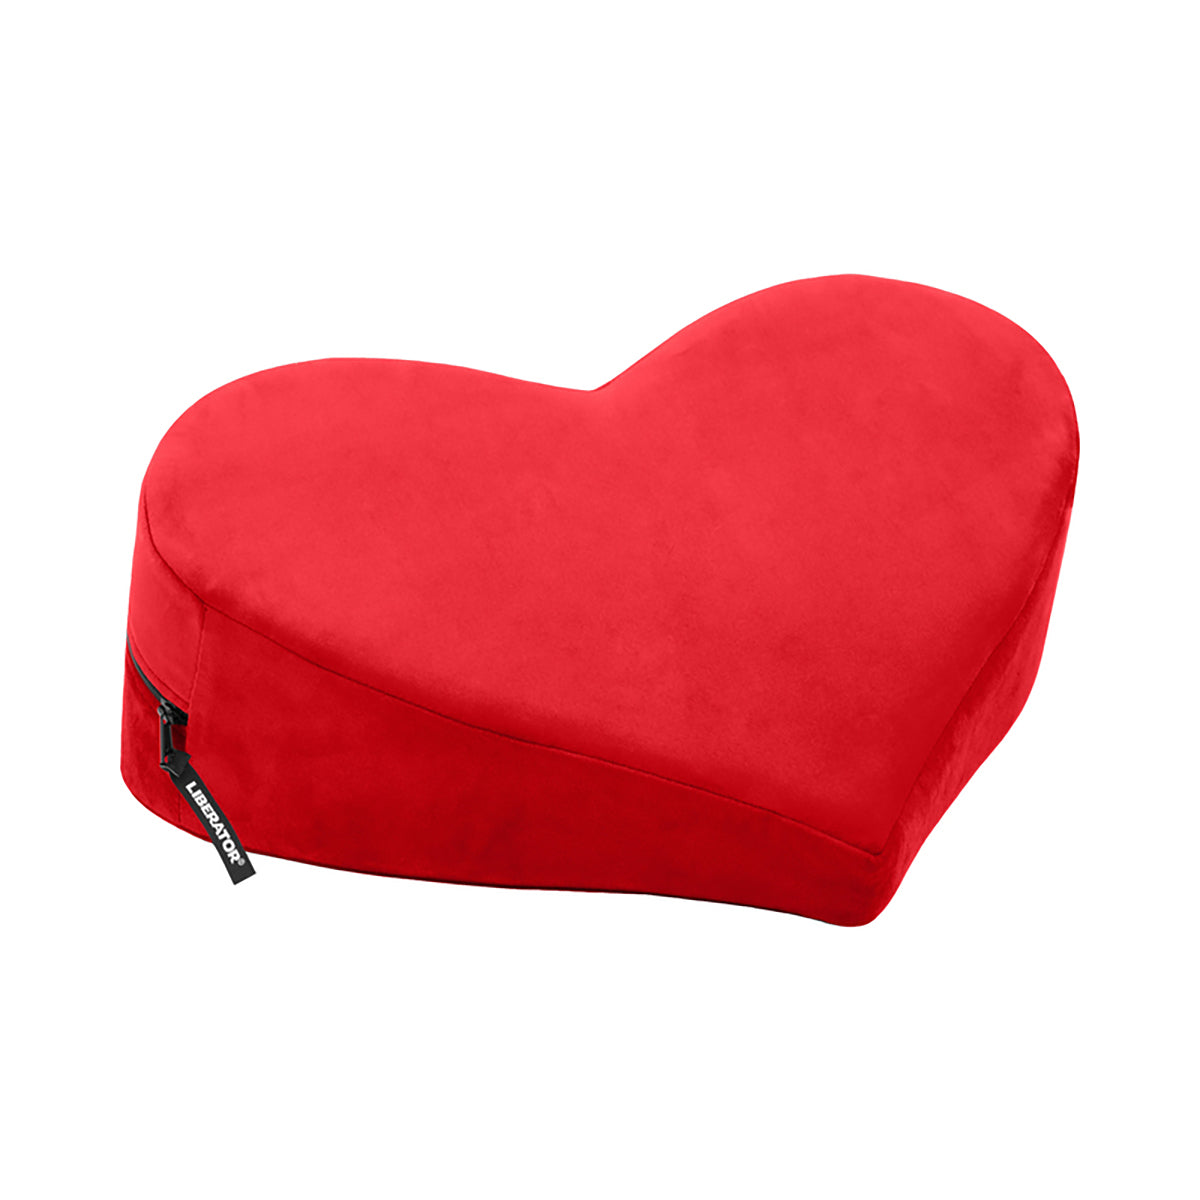 Liberator Heart Wedge Position Aid- Red